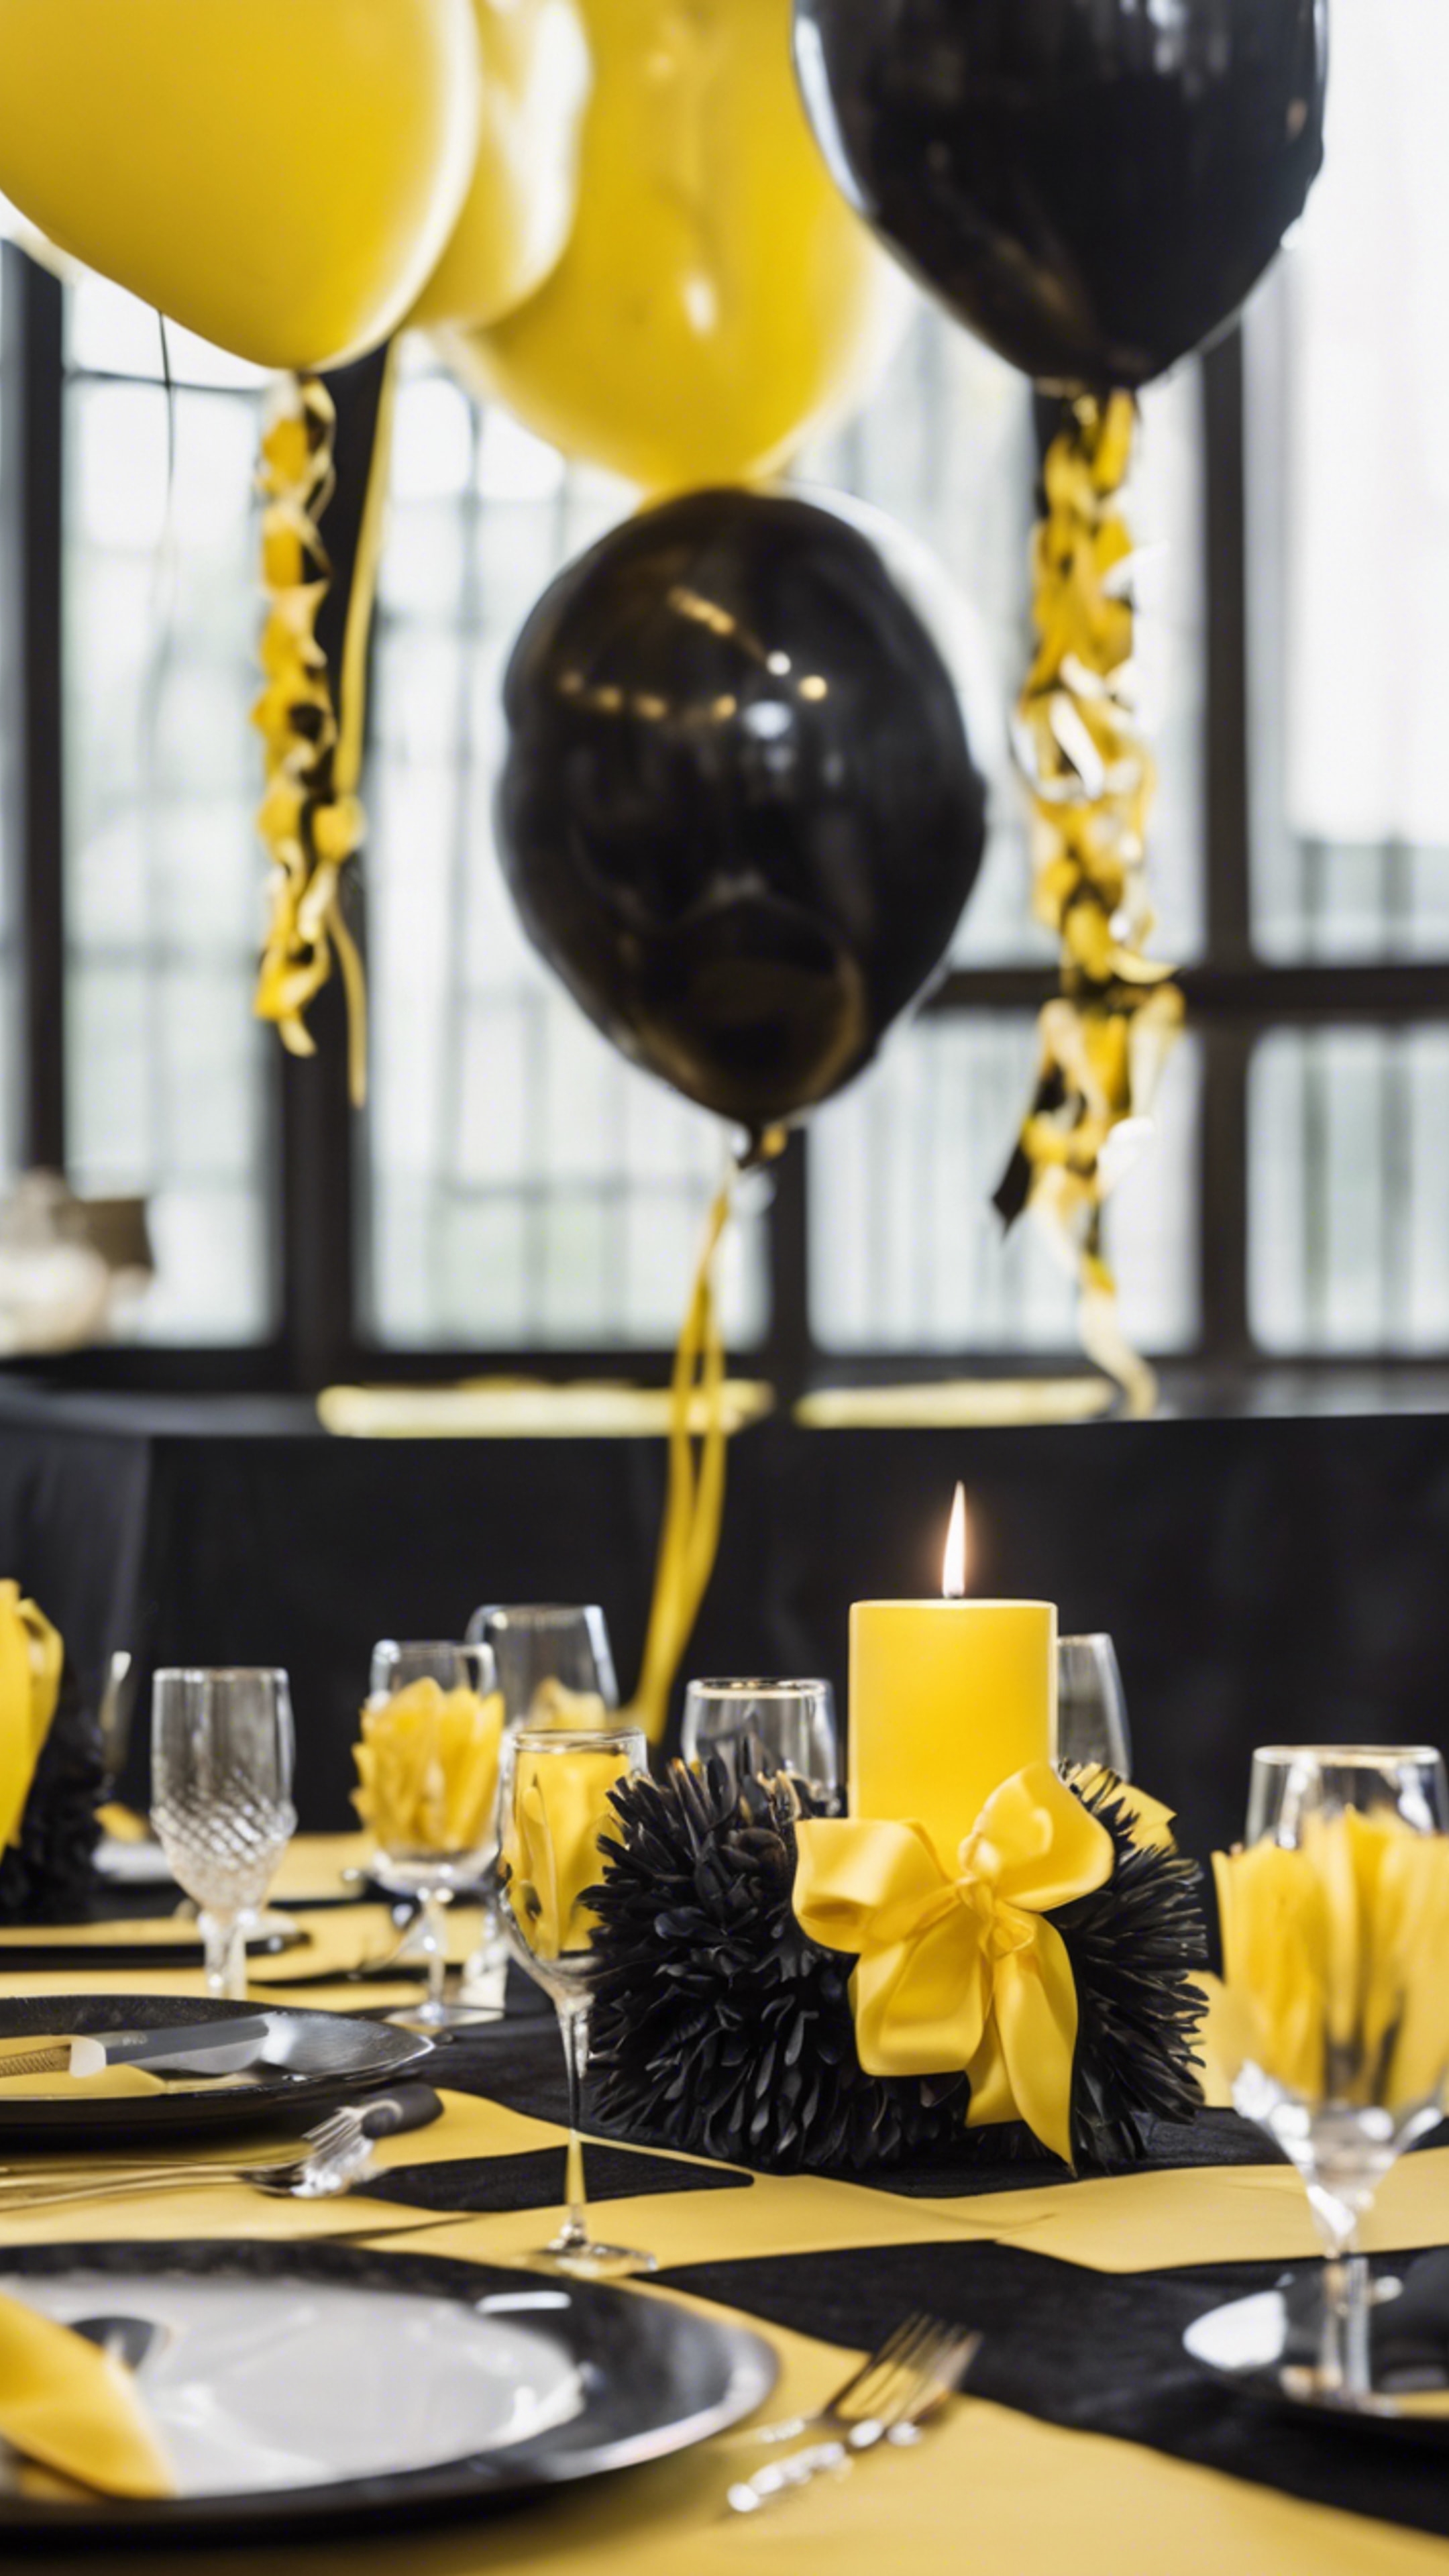 A table set with black and yellow themed party decorations for a birthday celebration. Ταπετσαρία[799426b85ea14846a022]